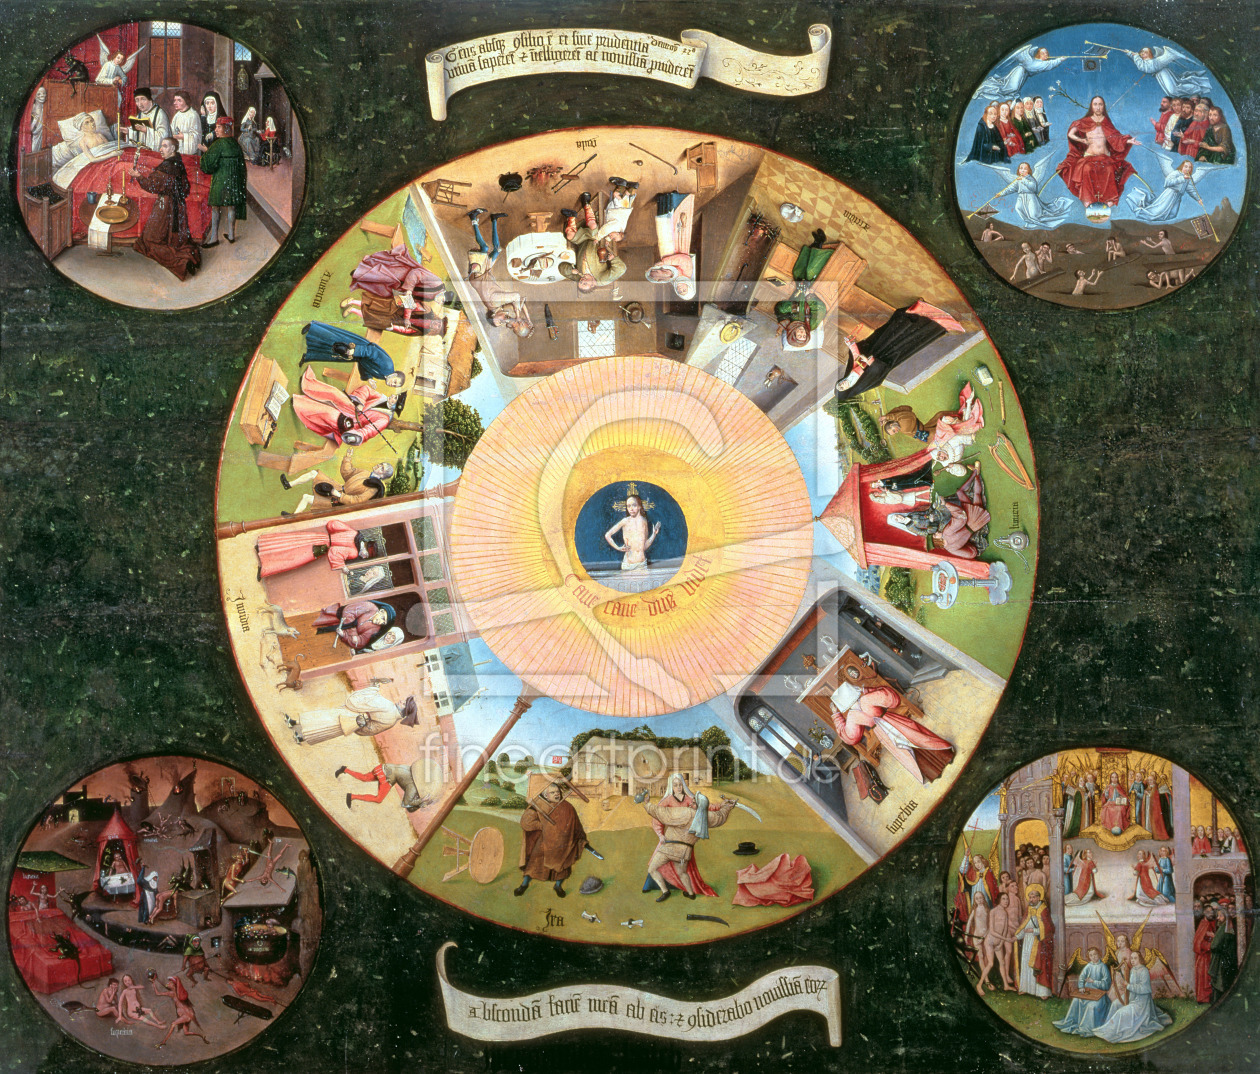 Bild-Nr.: 31000082 Tabletop of the Seven Deadly Sins and the Four Last Things erstellt von Bosch, Hieronymus